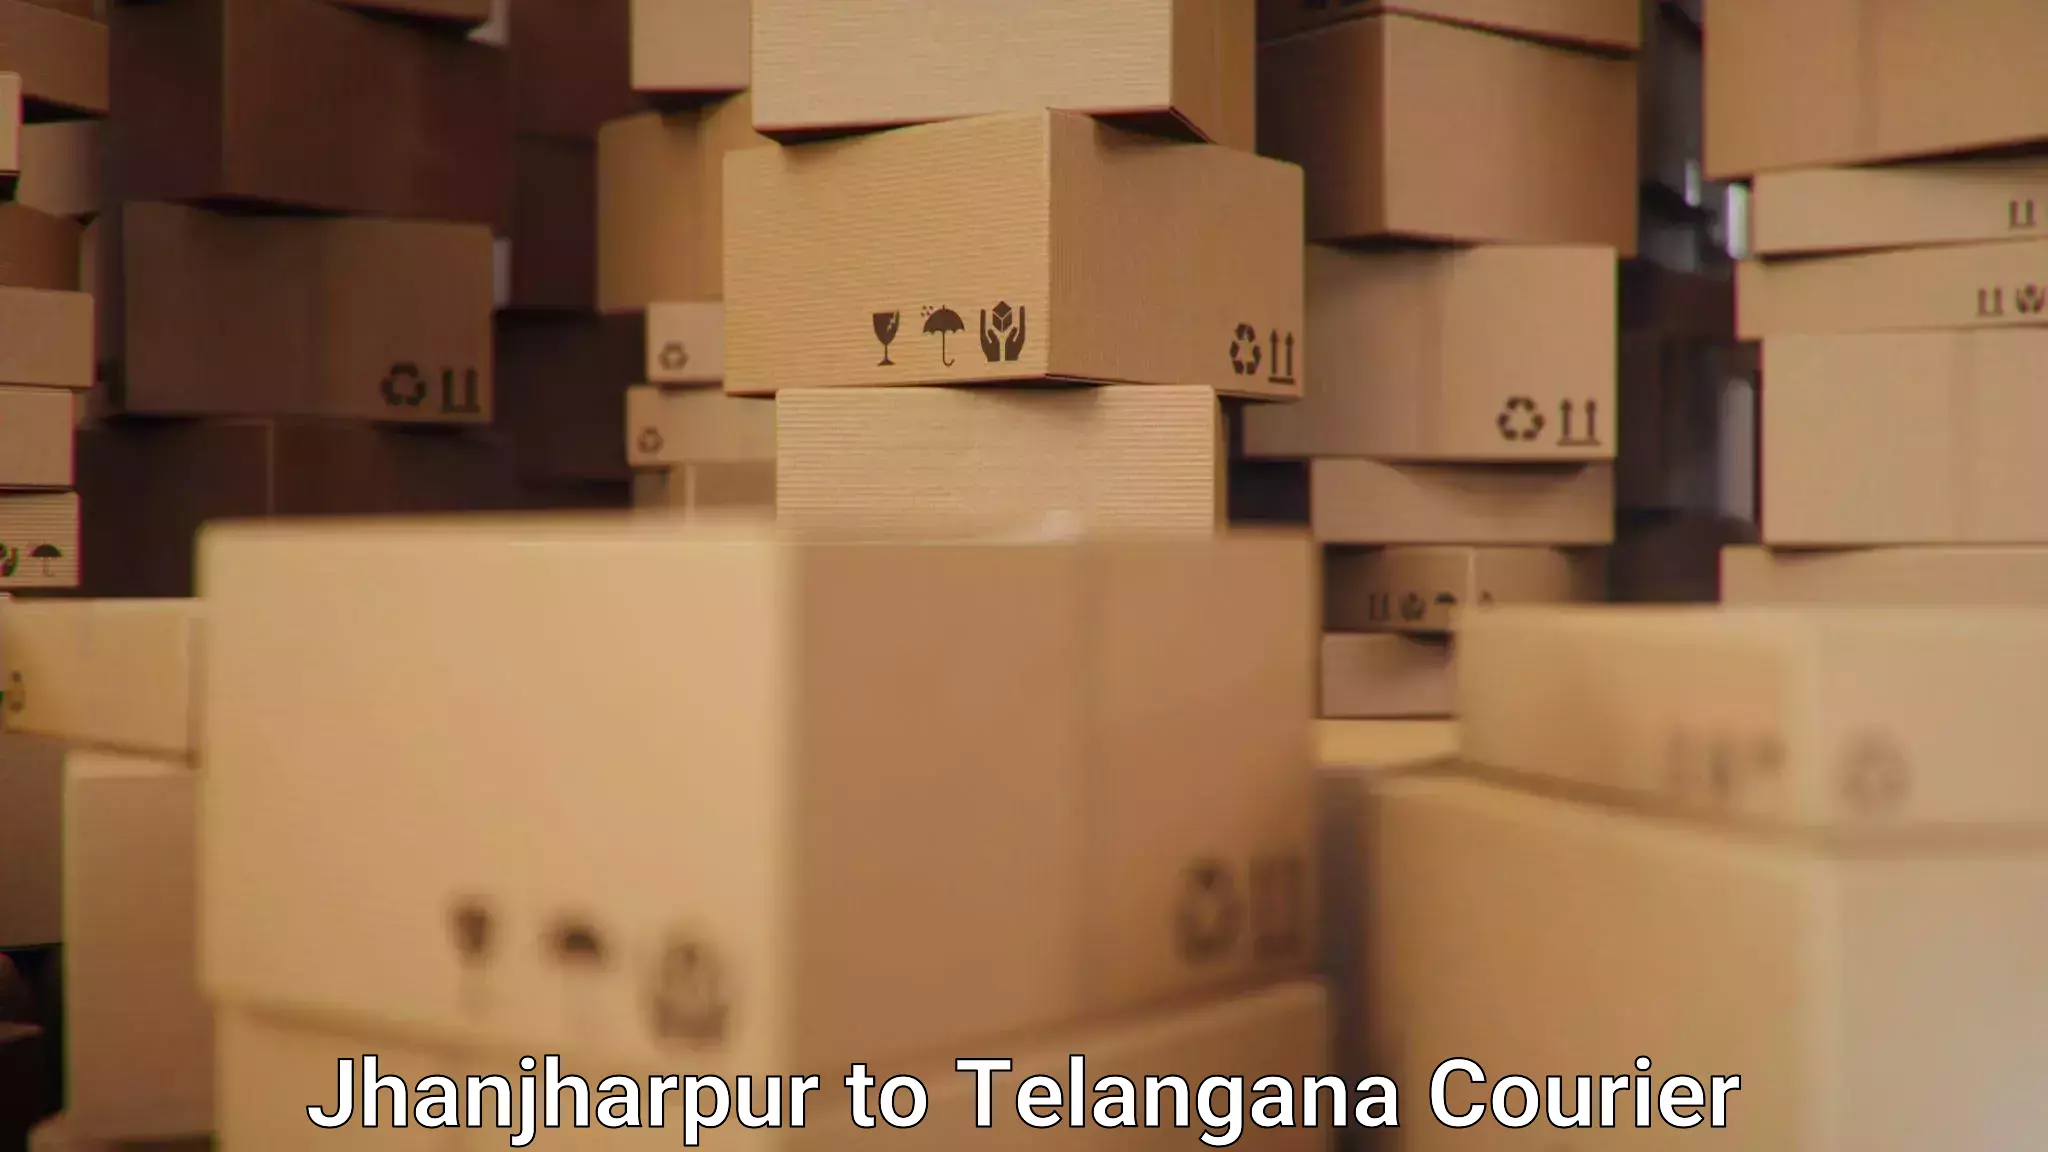 Courier service efficiency Jhanjharpur to Secunderabad